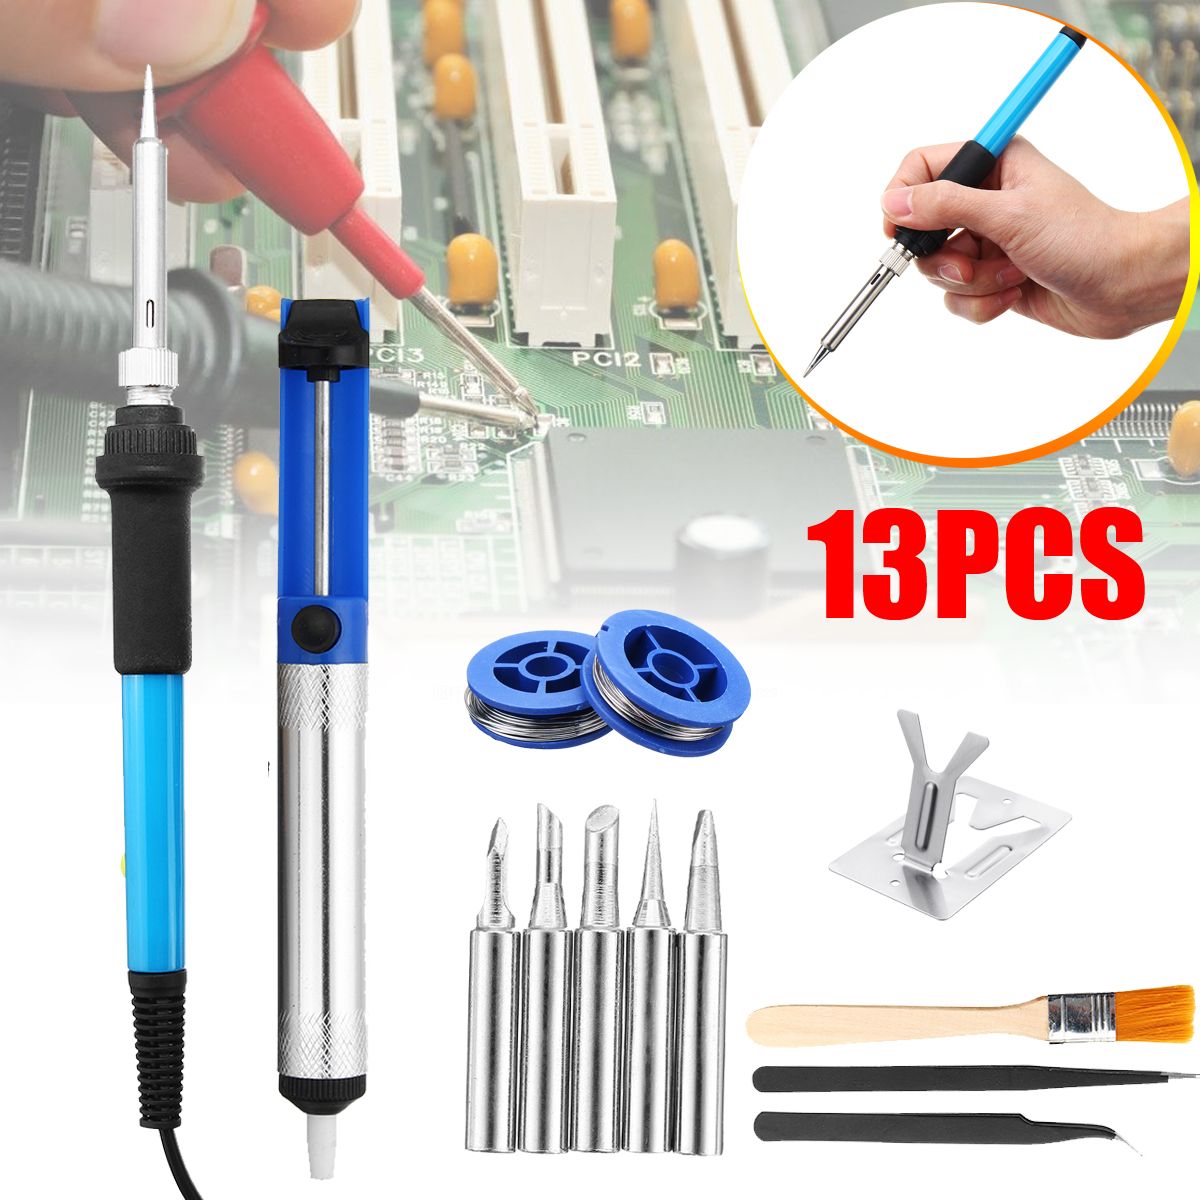 13Pcs-60W-110V220V-Electric-Solder-Iron-Welding-Tool-Soldering-Wire-Iron-Tips-1423185